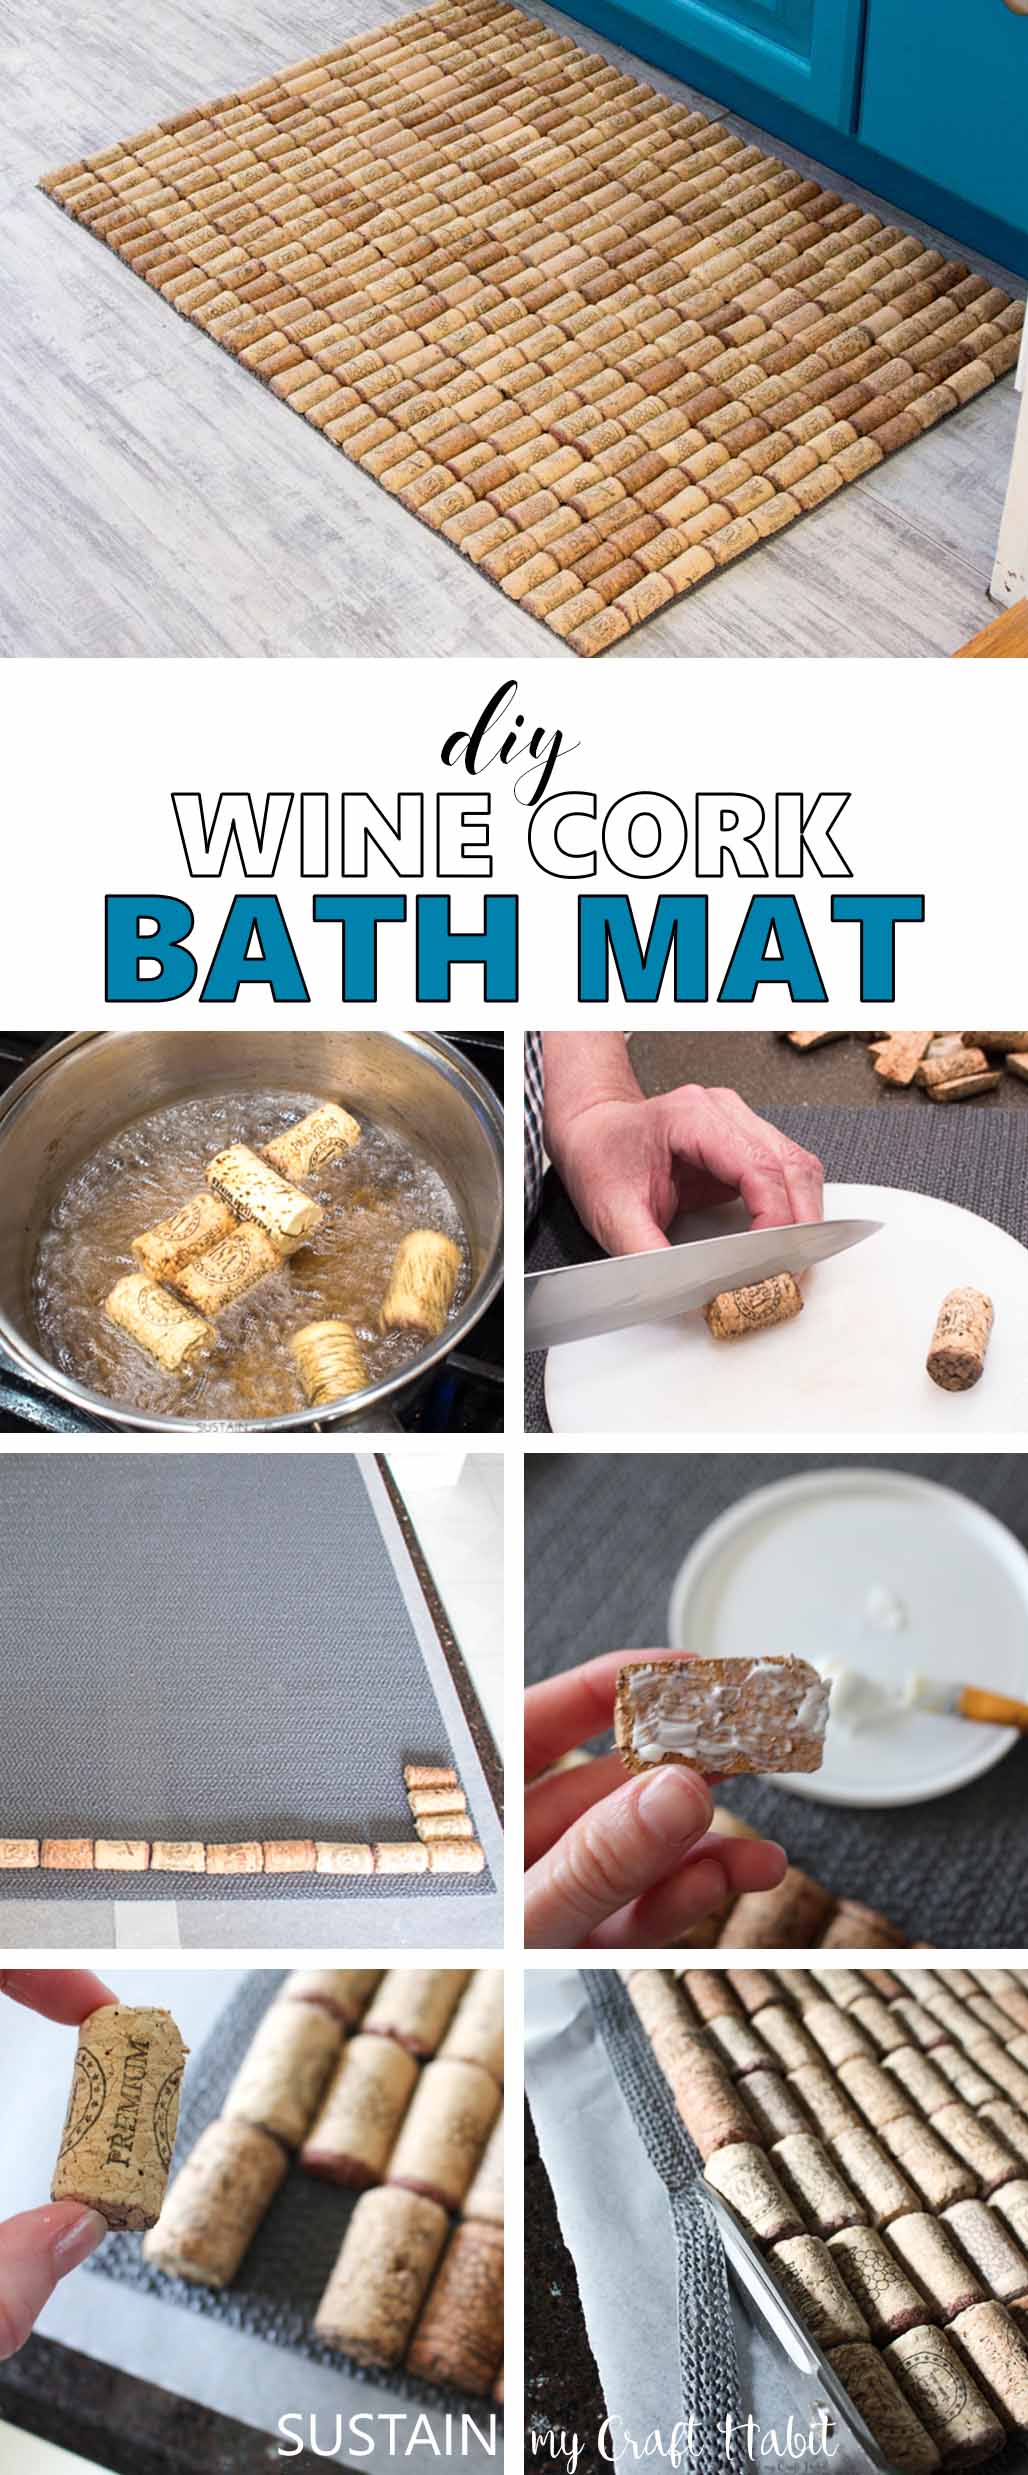 Collage of images showing how to make a DIY wine cork bath mat